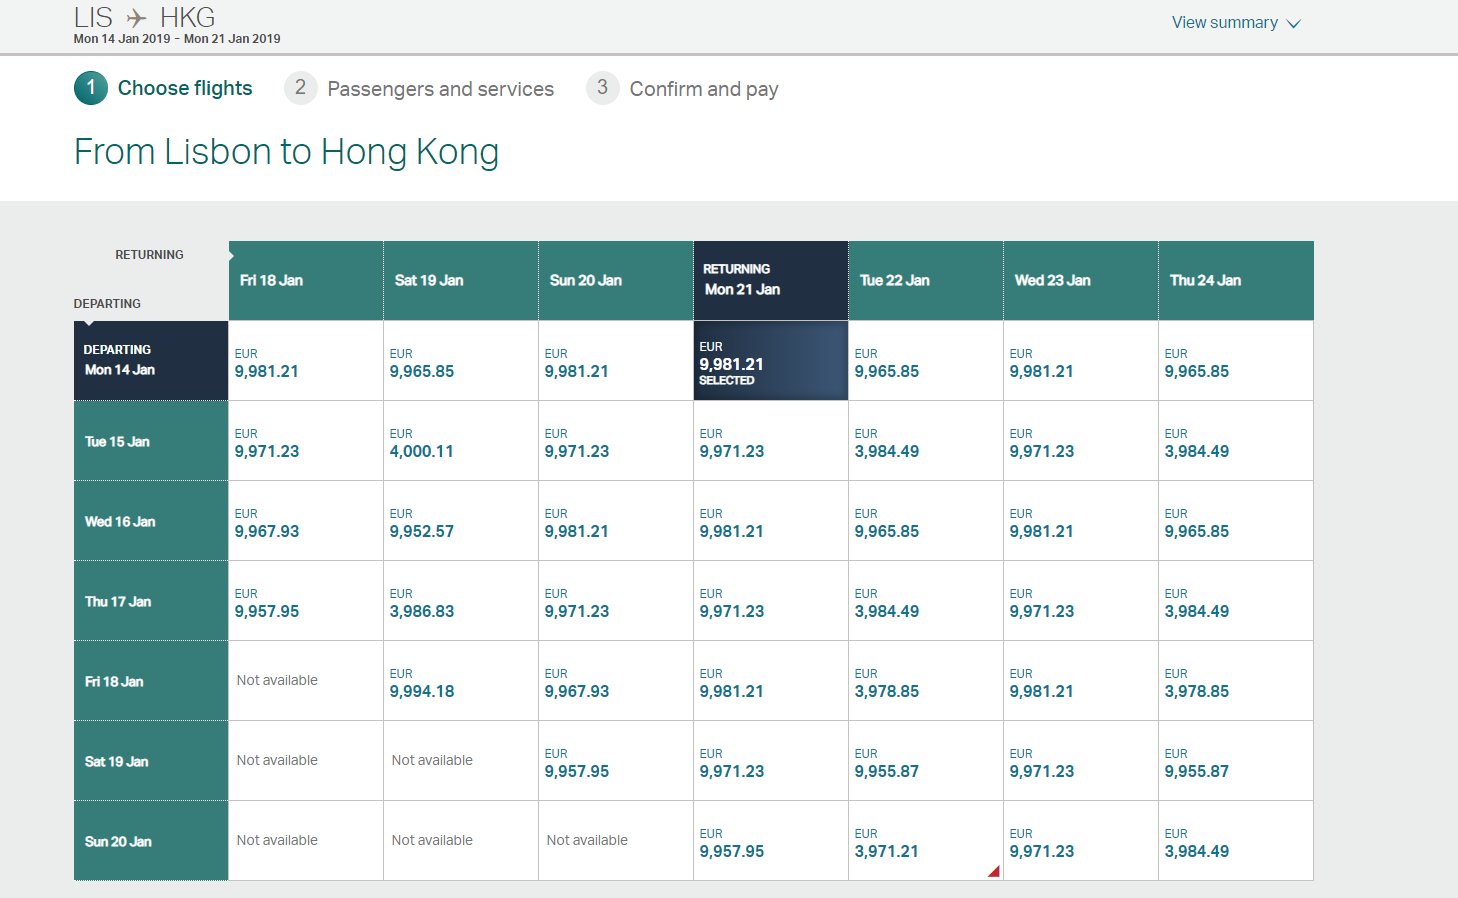 The price of an economy flight from Lisbon to Hong Kong today is almost £10,000